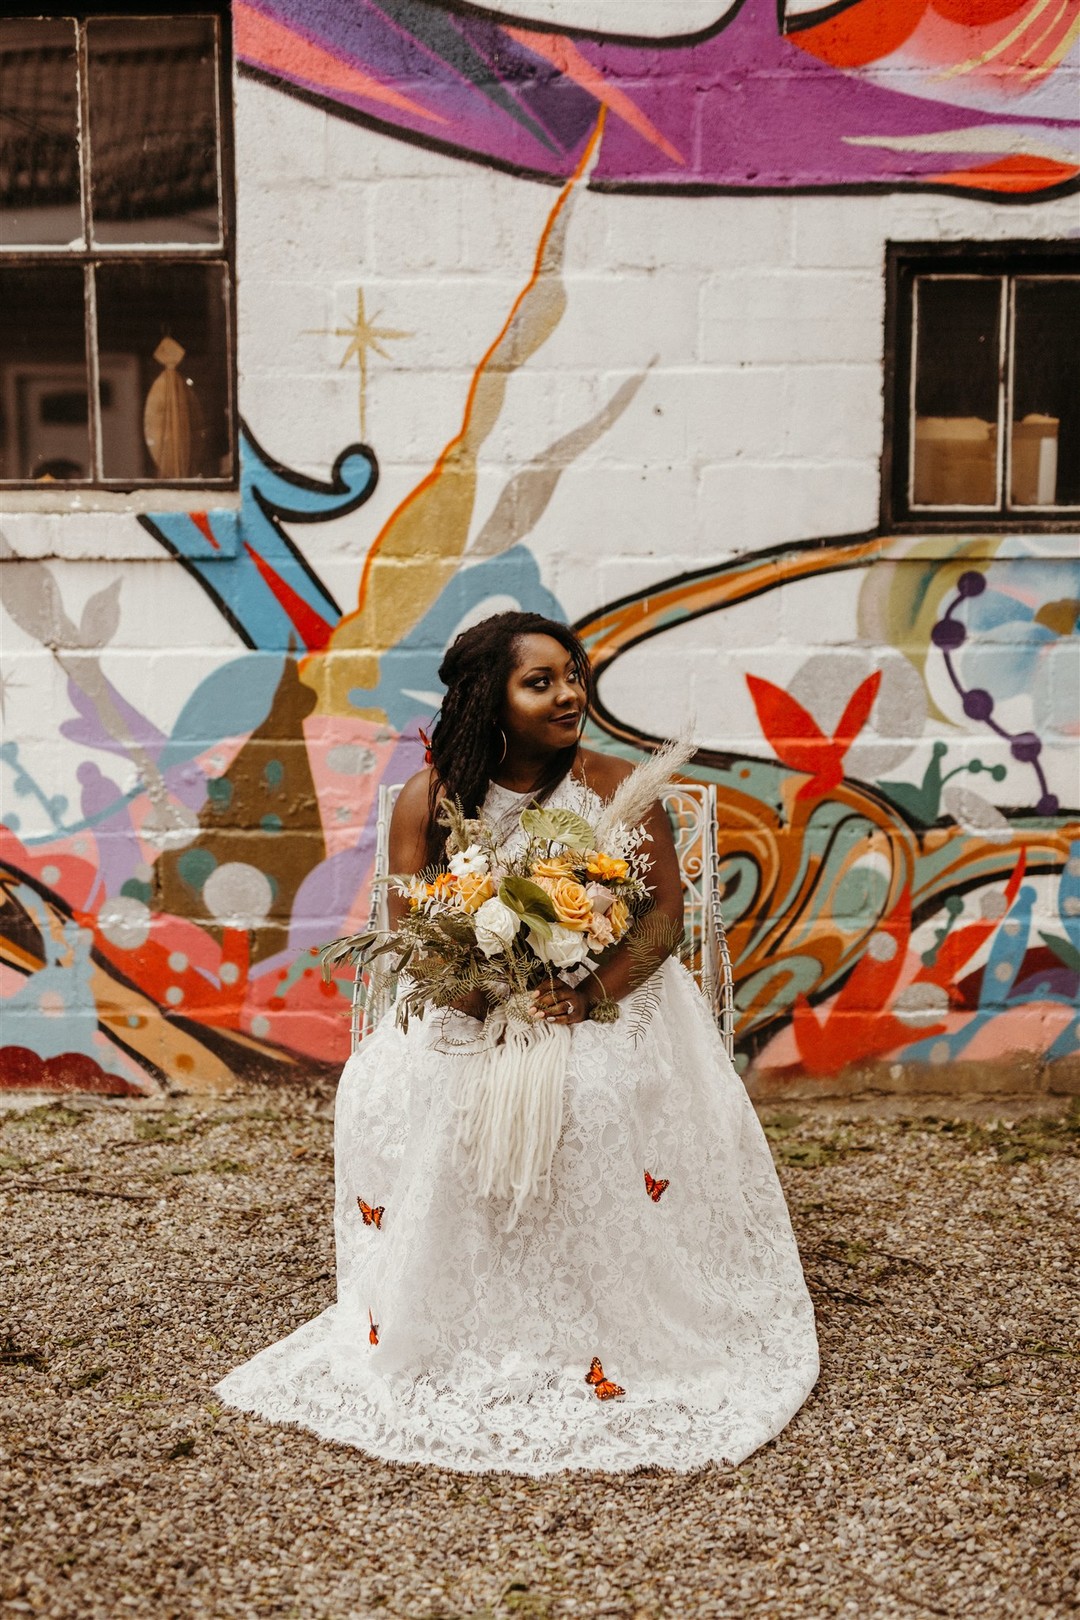 A rustic boho wedding in the city is an unexpected concept, which is pulled of in this wedding shoot